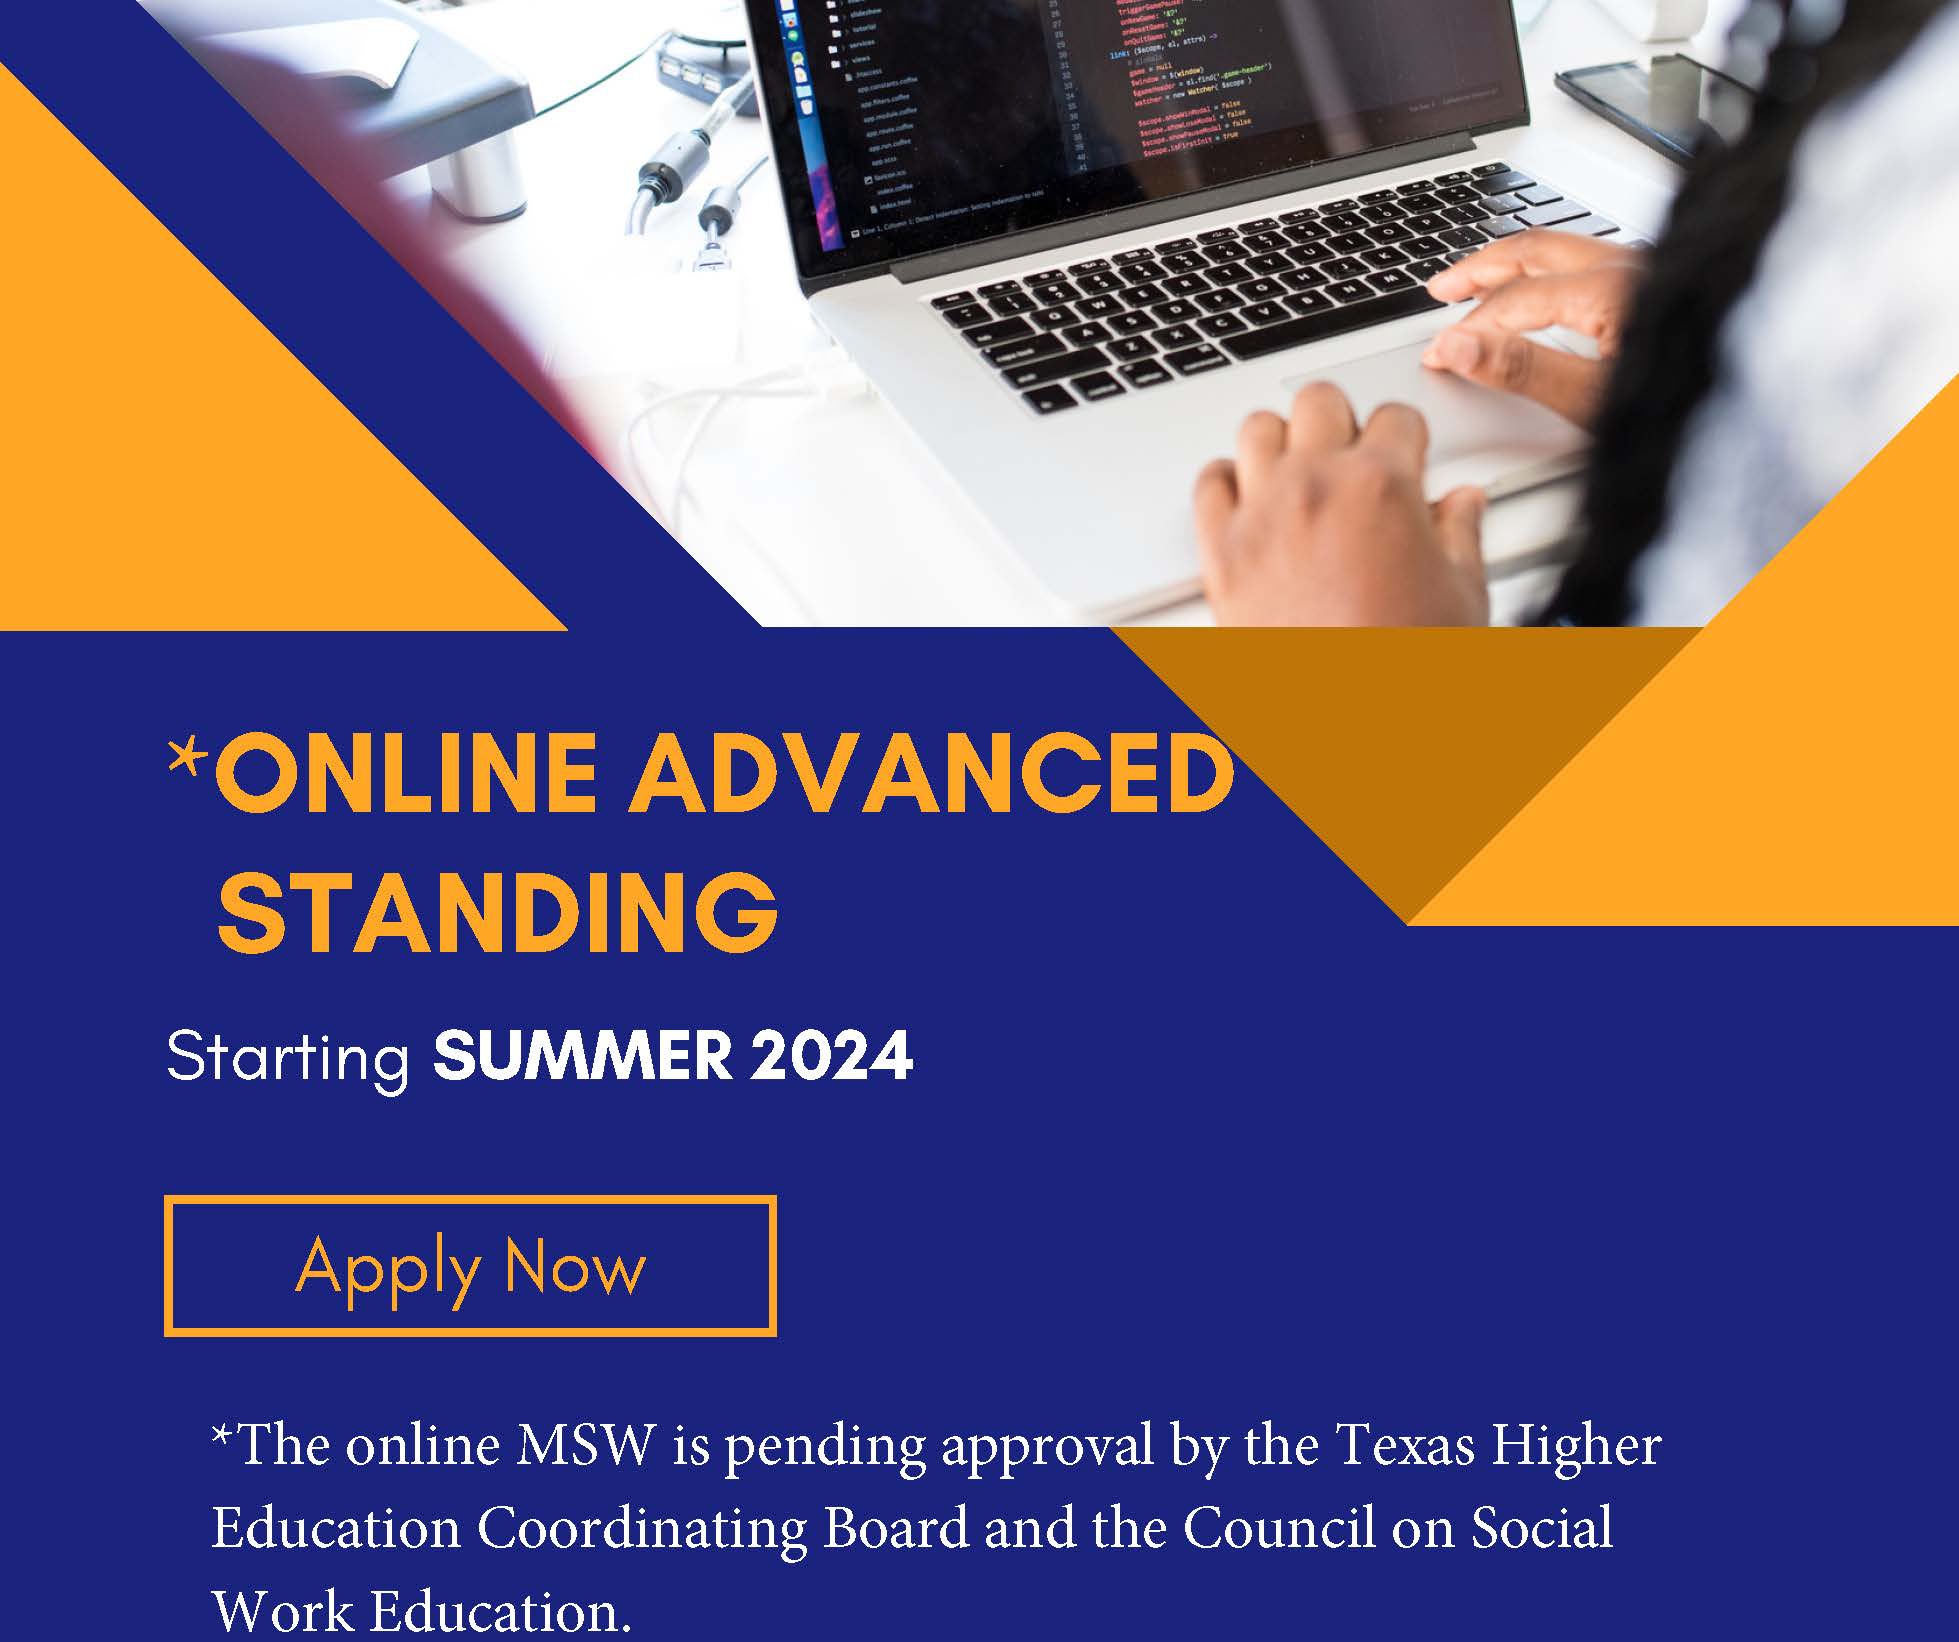 The first class of advanced admission students for the new Online MSW start this summer. Apply Now!